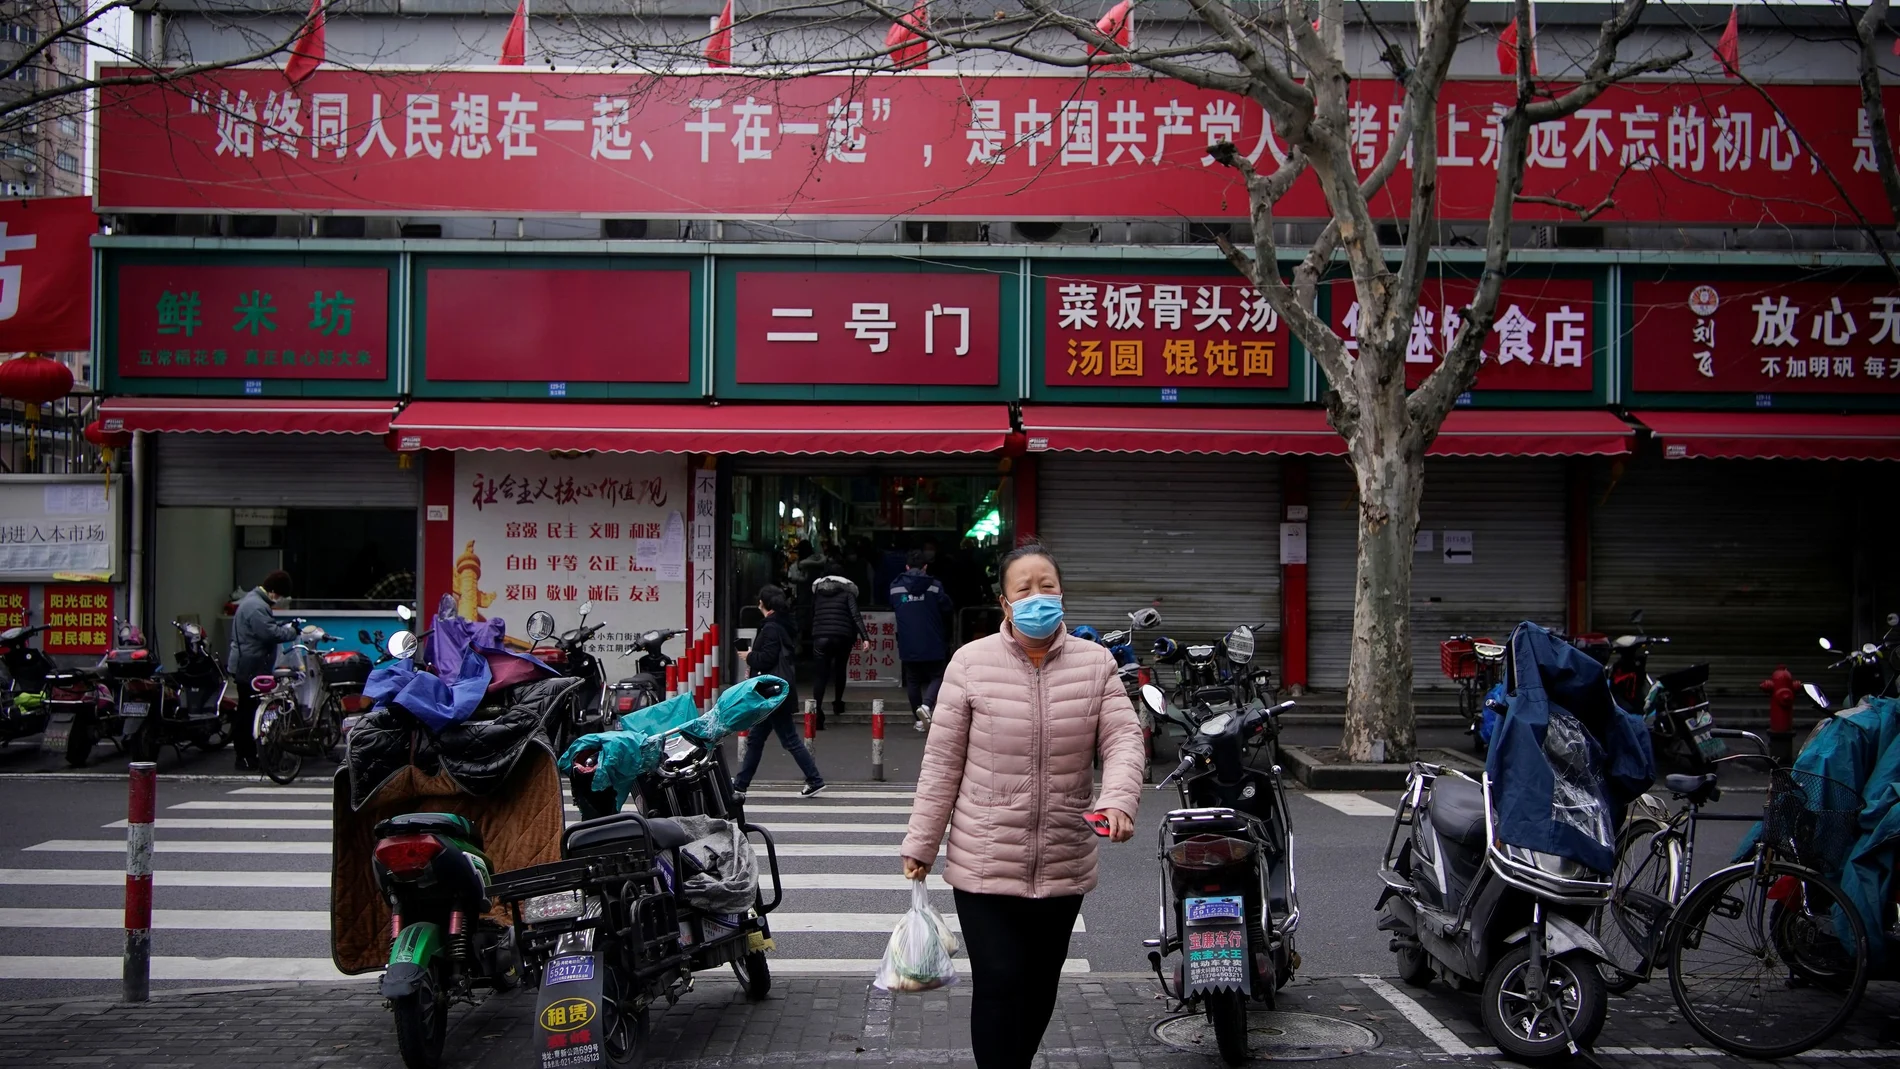 A woman wearing a protective face mask is seen at a residential community following an outbreak of coronavirus (COVID-19), in downtown Shanghai